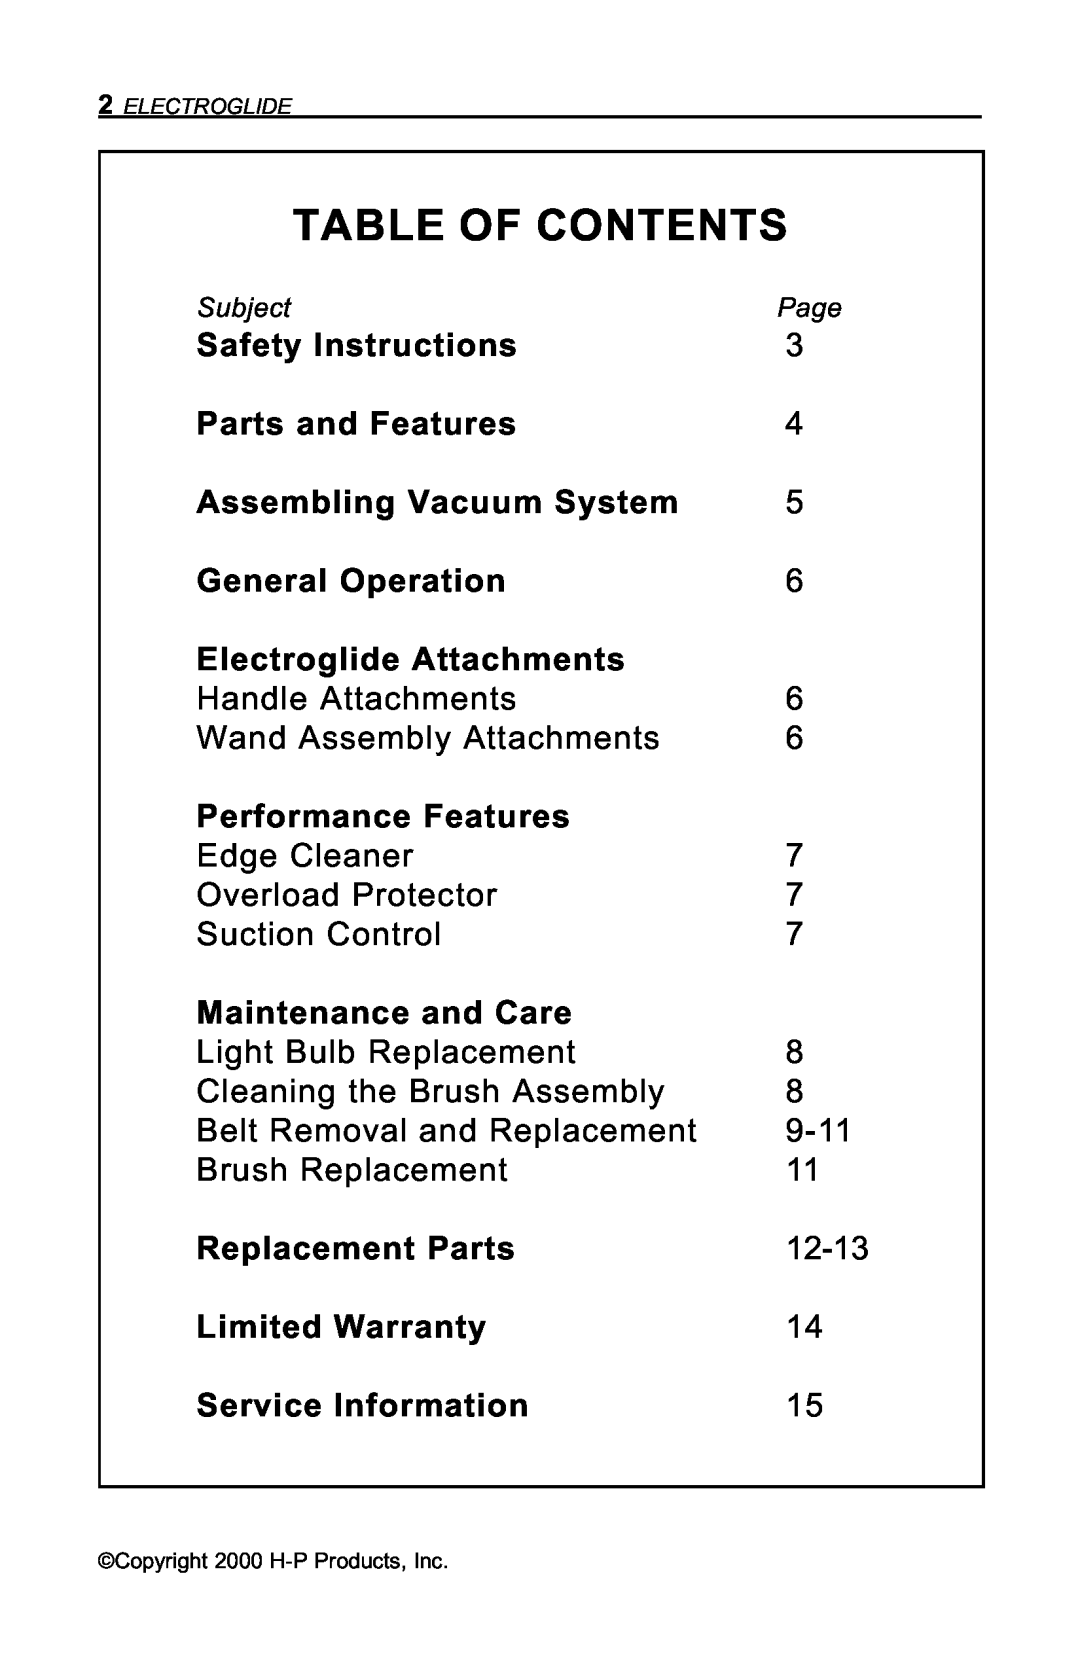 H-P Products Electroglide owner manual Table Of Contents 